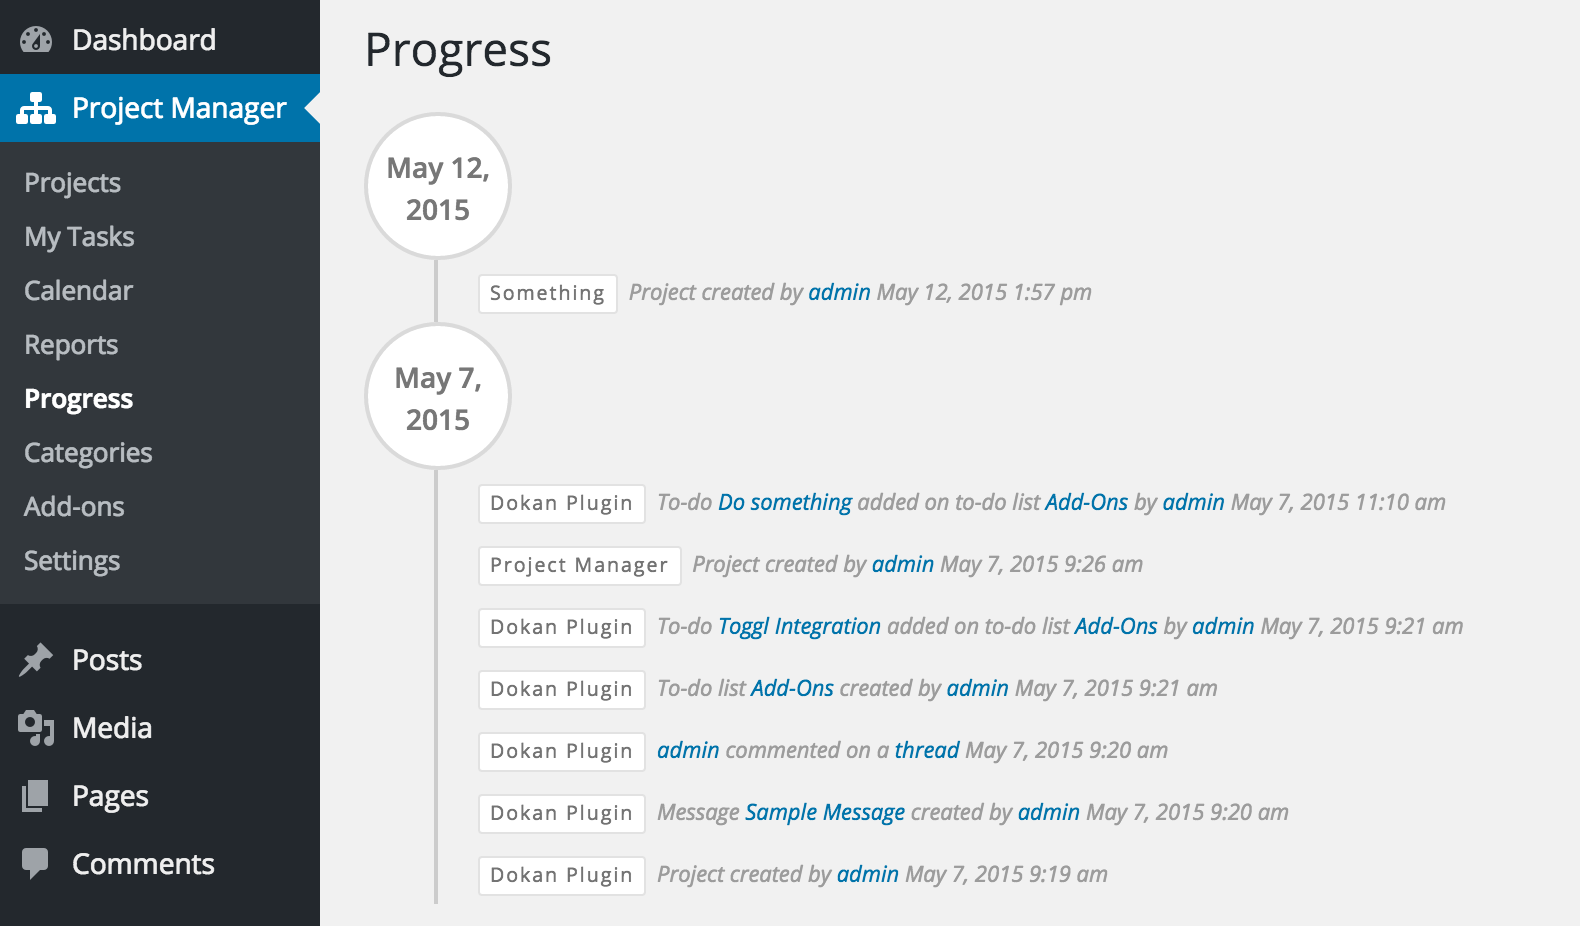 Project Manager Progress